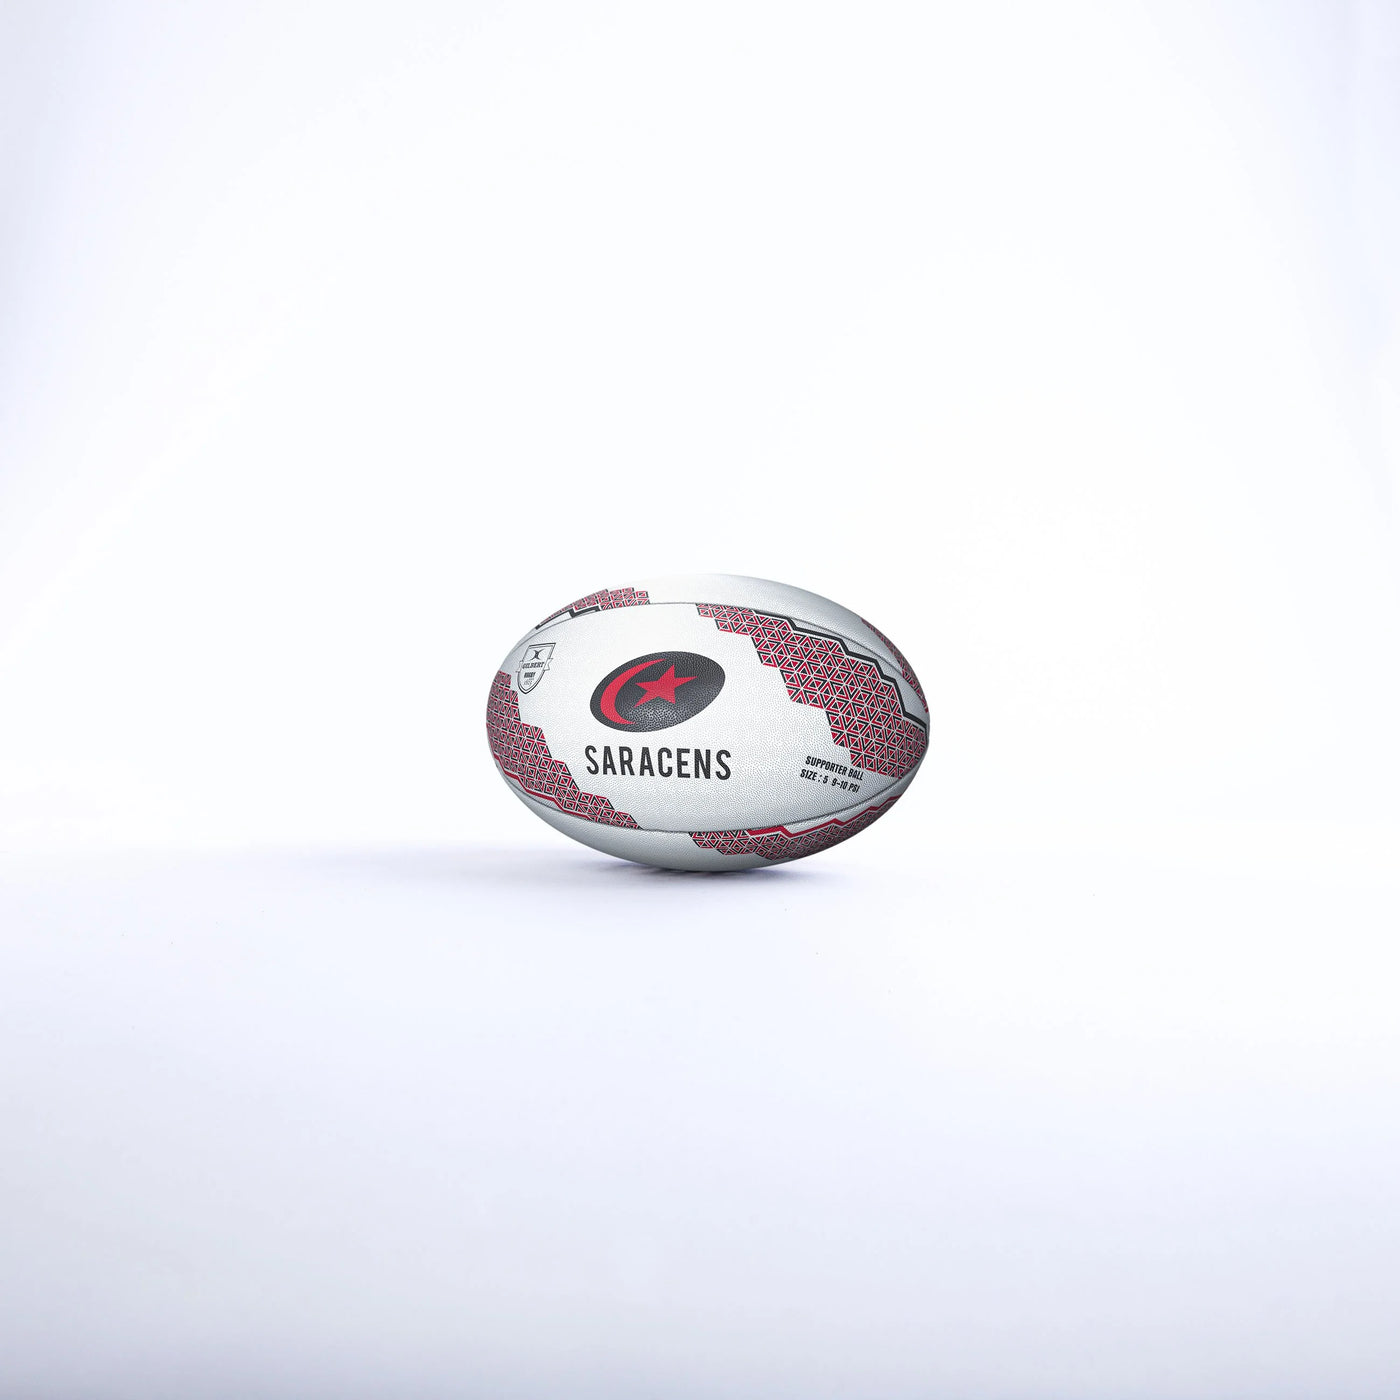 Saracens Supporter Rugby Ball Size 4